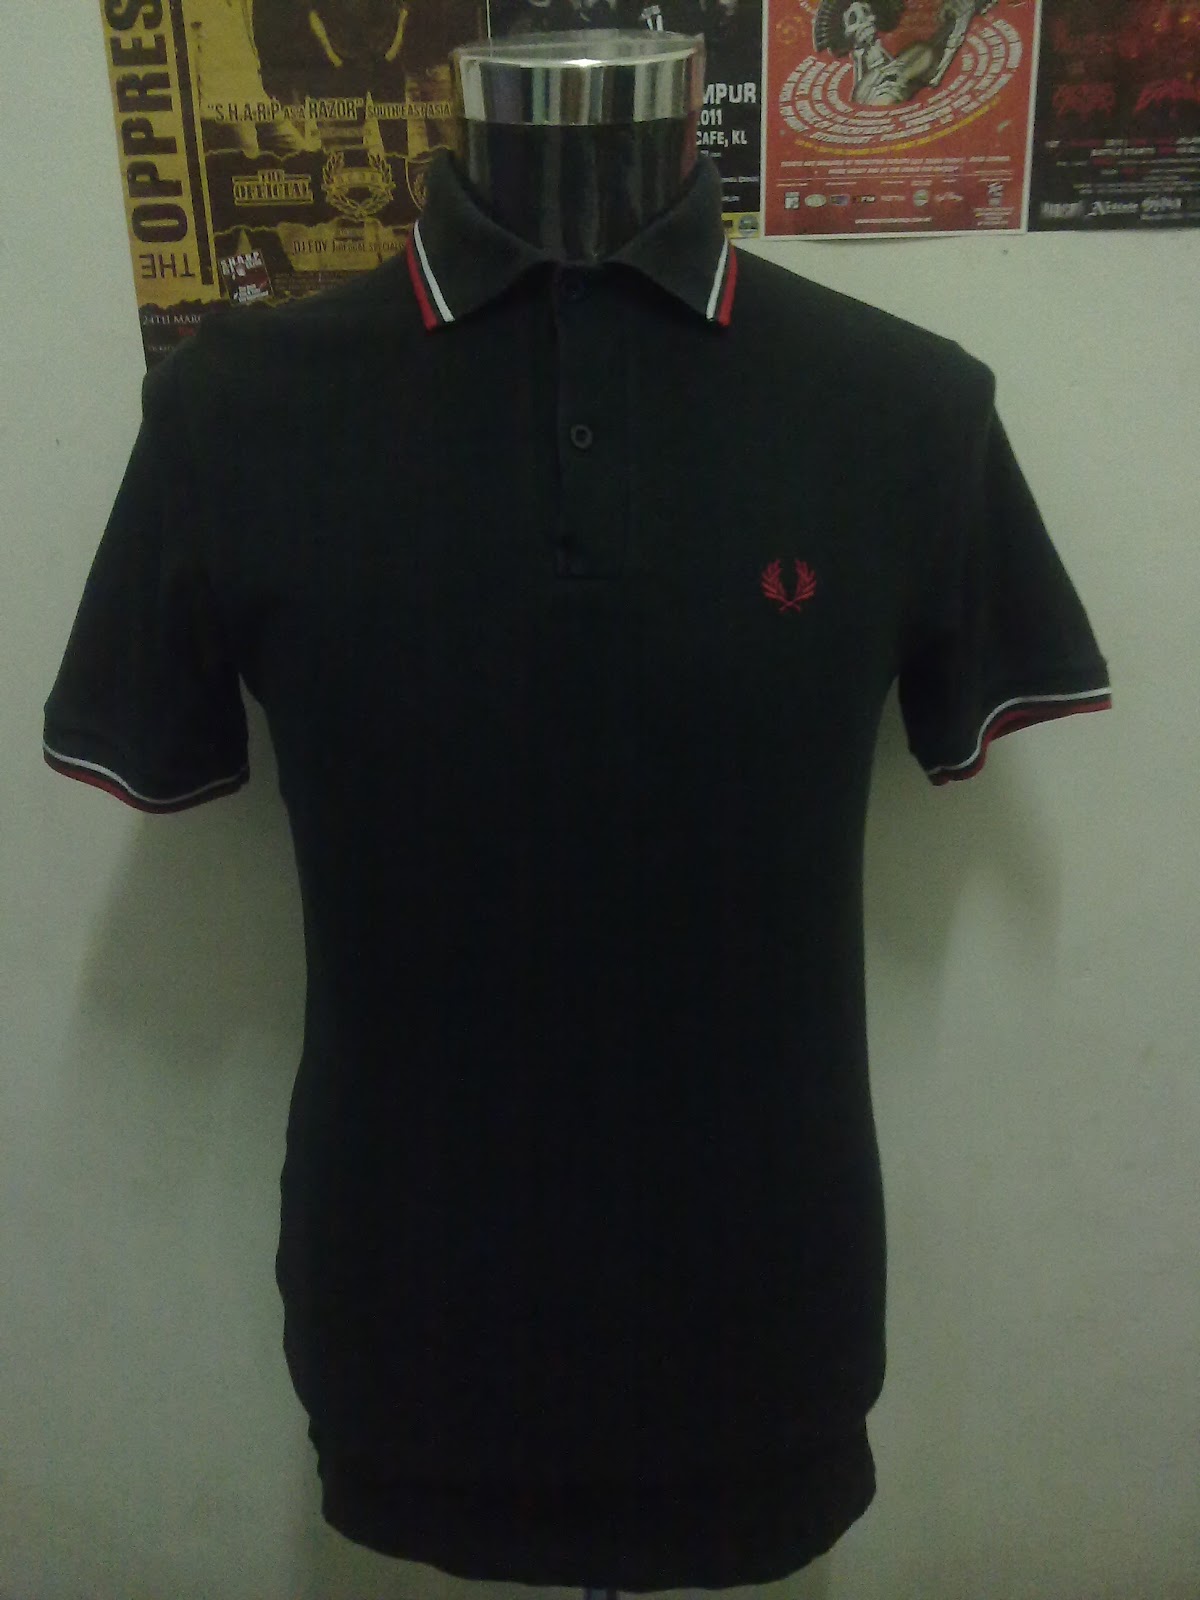 baju fred perry